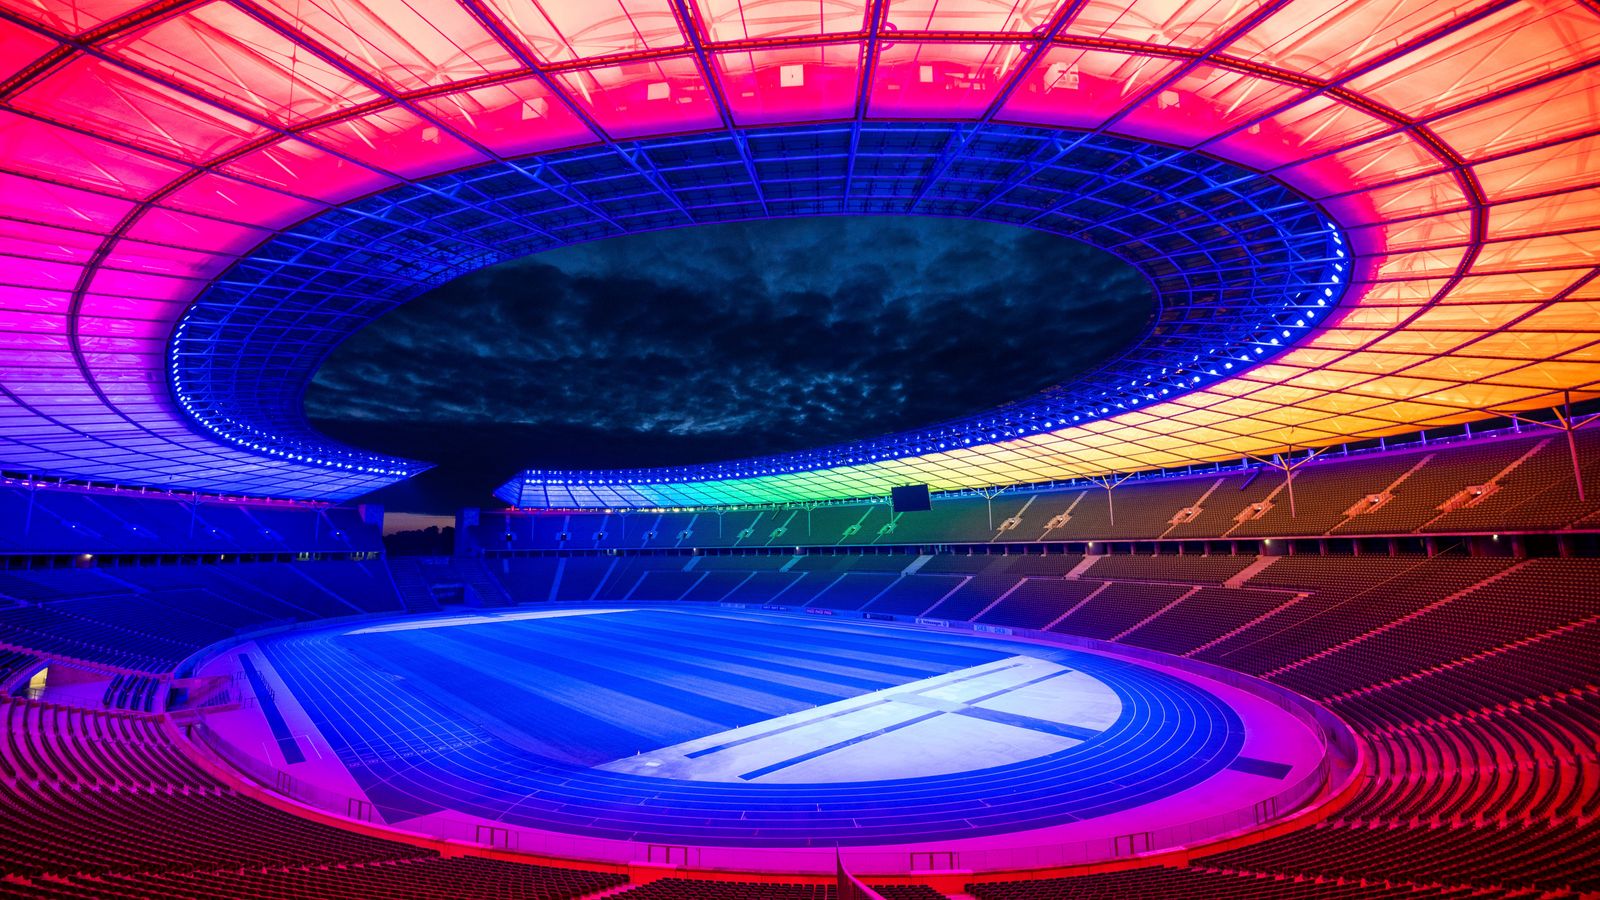 Euro 2020’s rainbow connection: How Germany led a continental call for LGBTQ+ equality through football